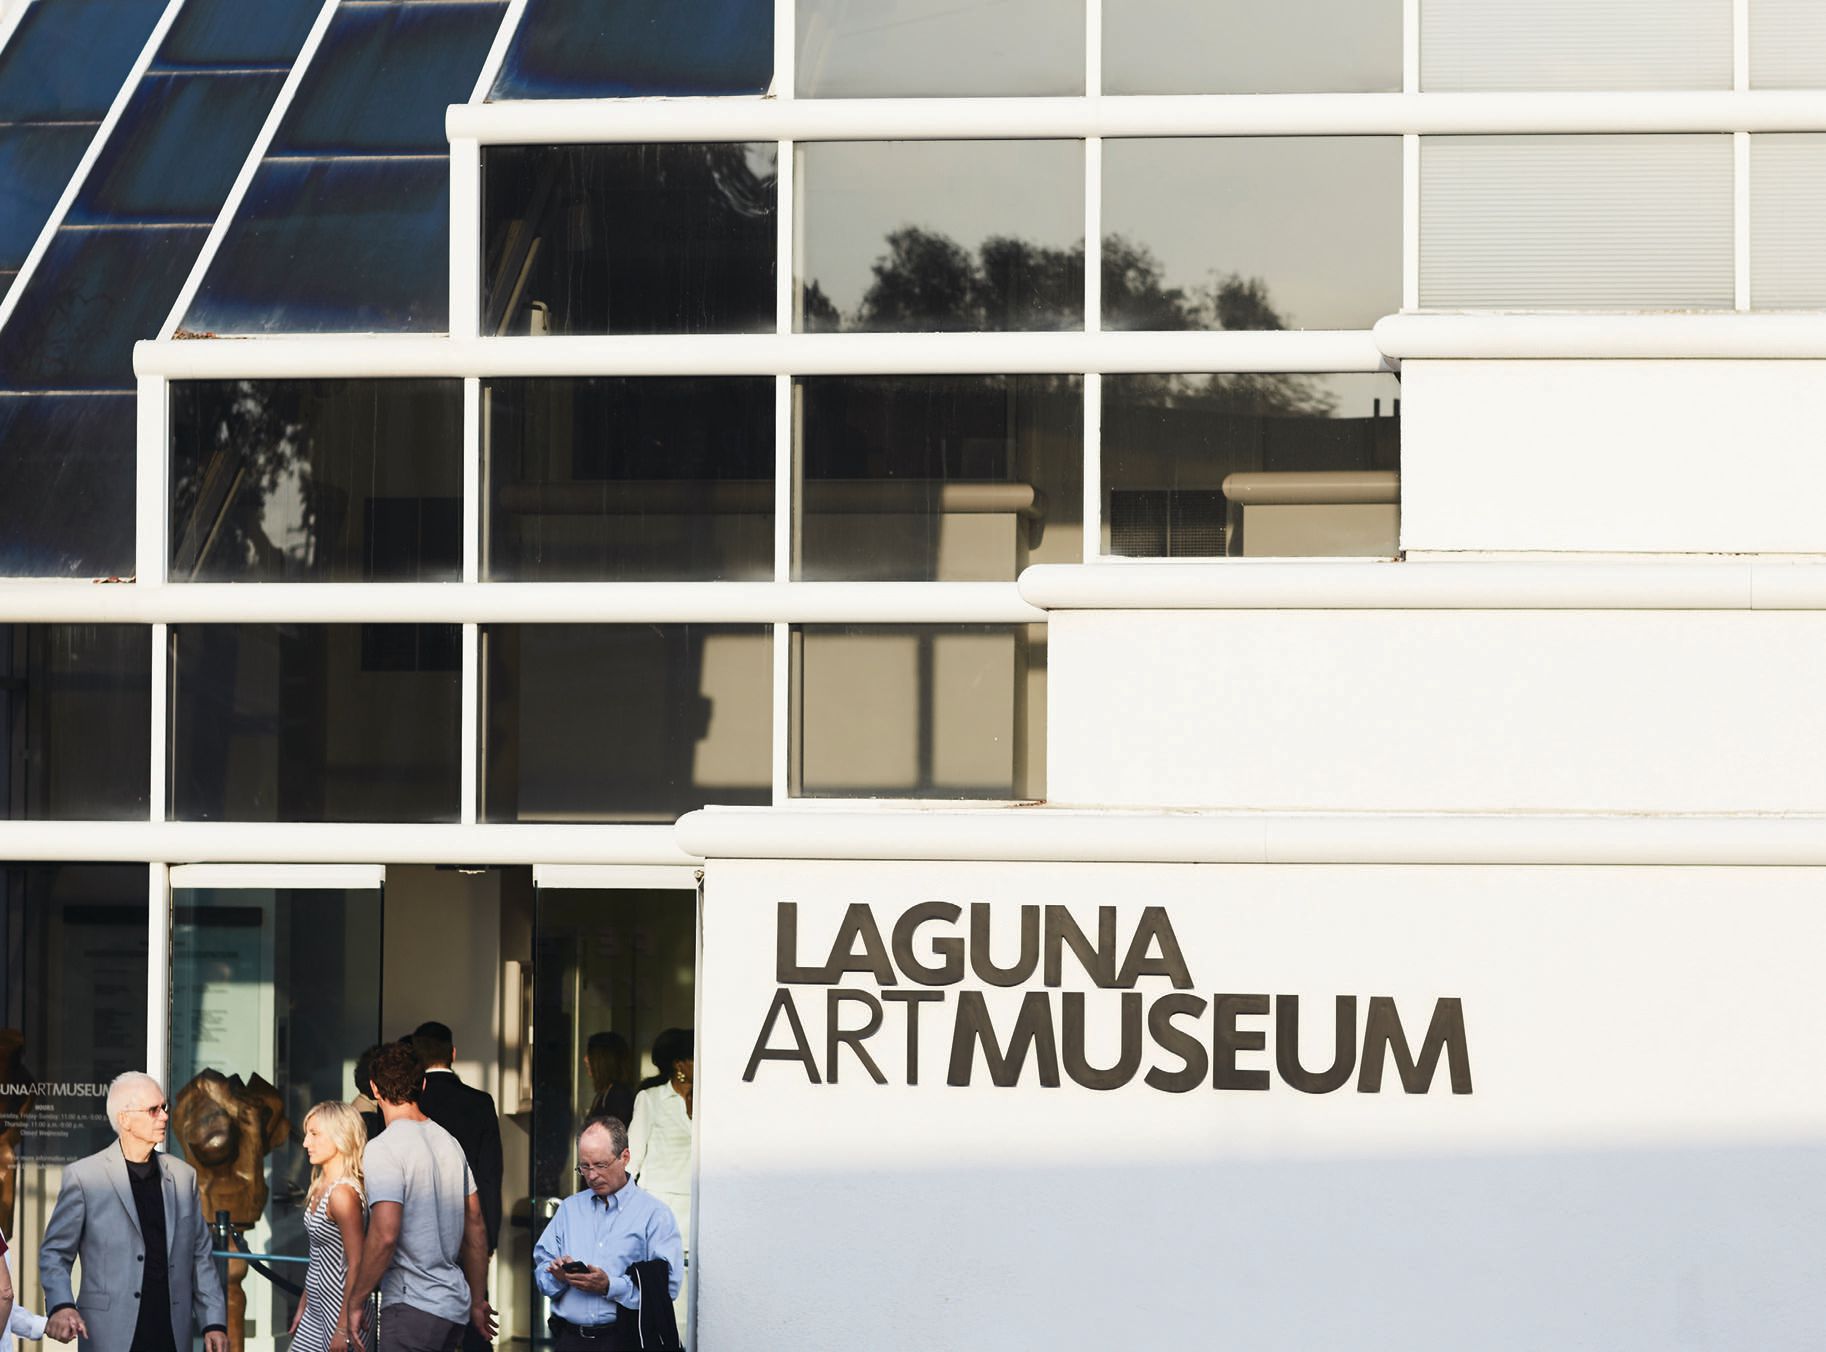 Laguna Art Museum’s 10th annual Art & Nature Festival will welcome thousands of guests from Nov. 3 to 6. PHOTO COURTESY OF LAGUNA ART MUSEUM